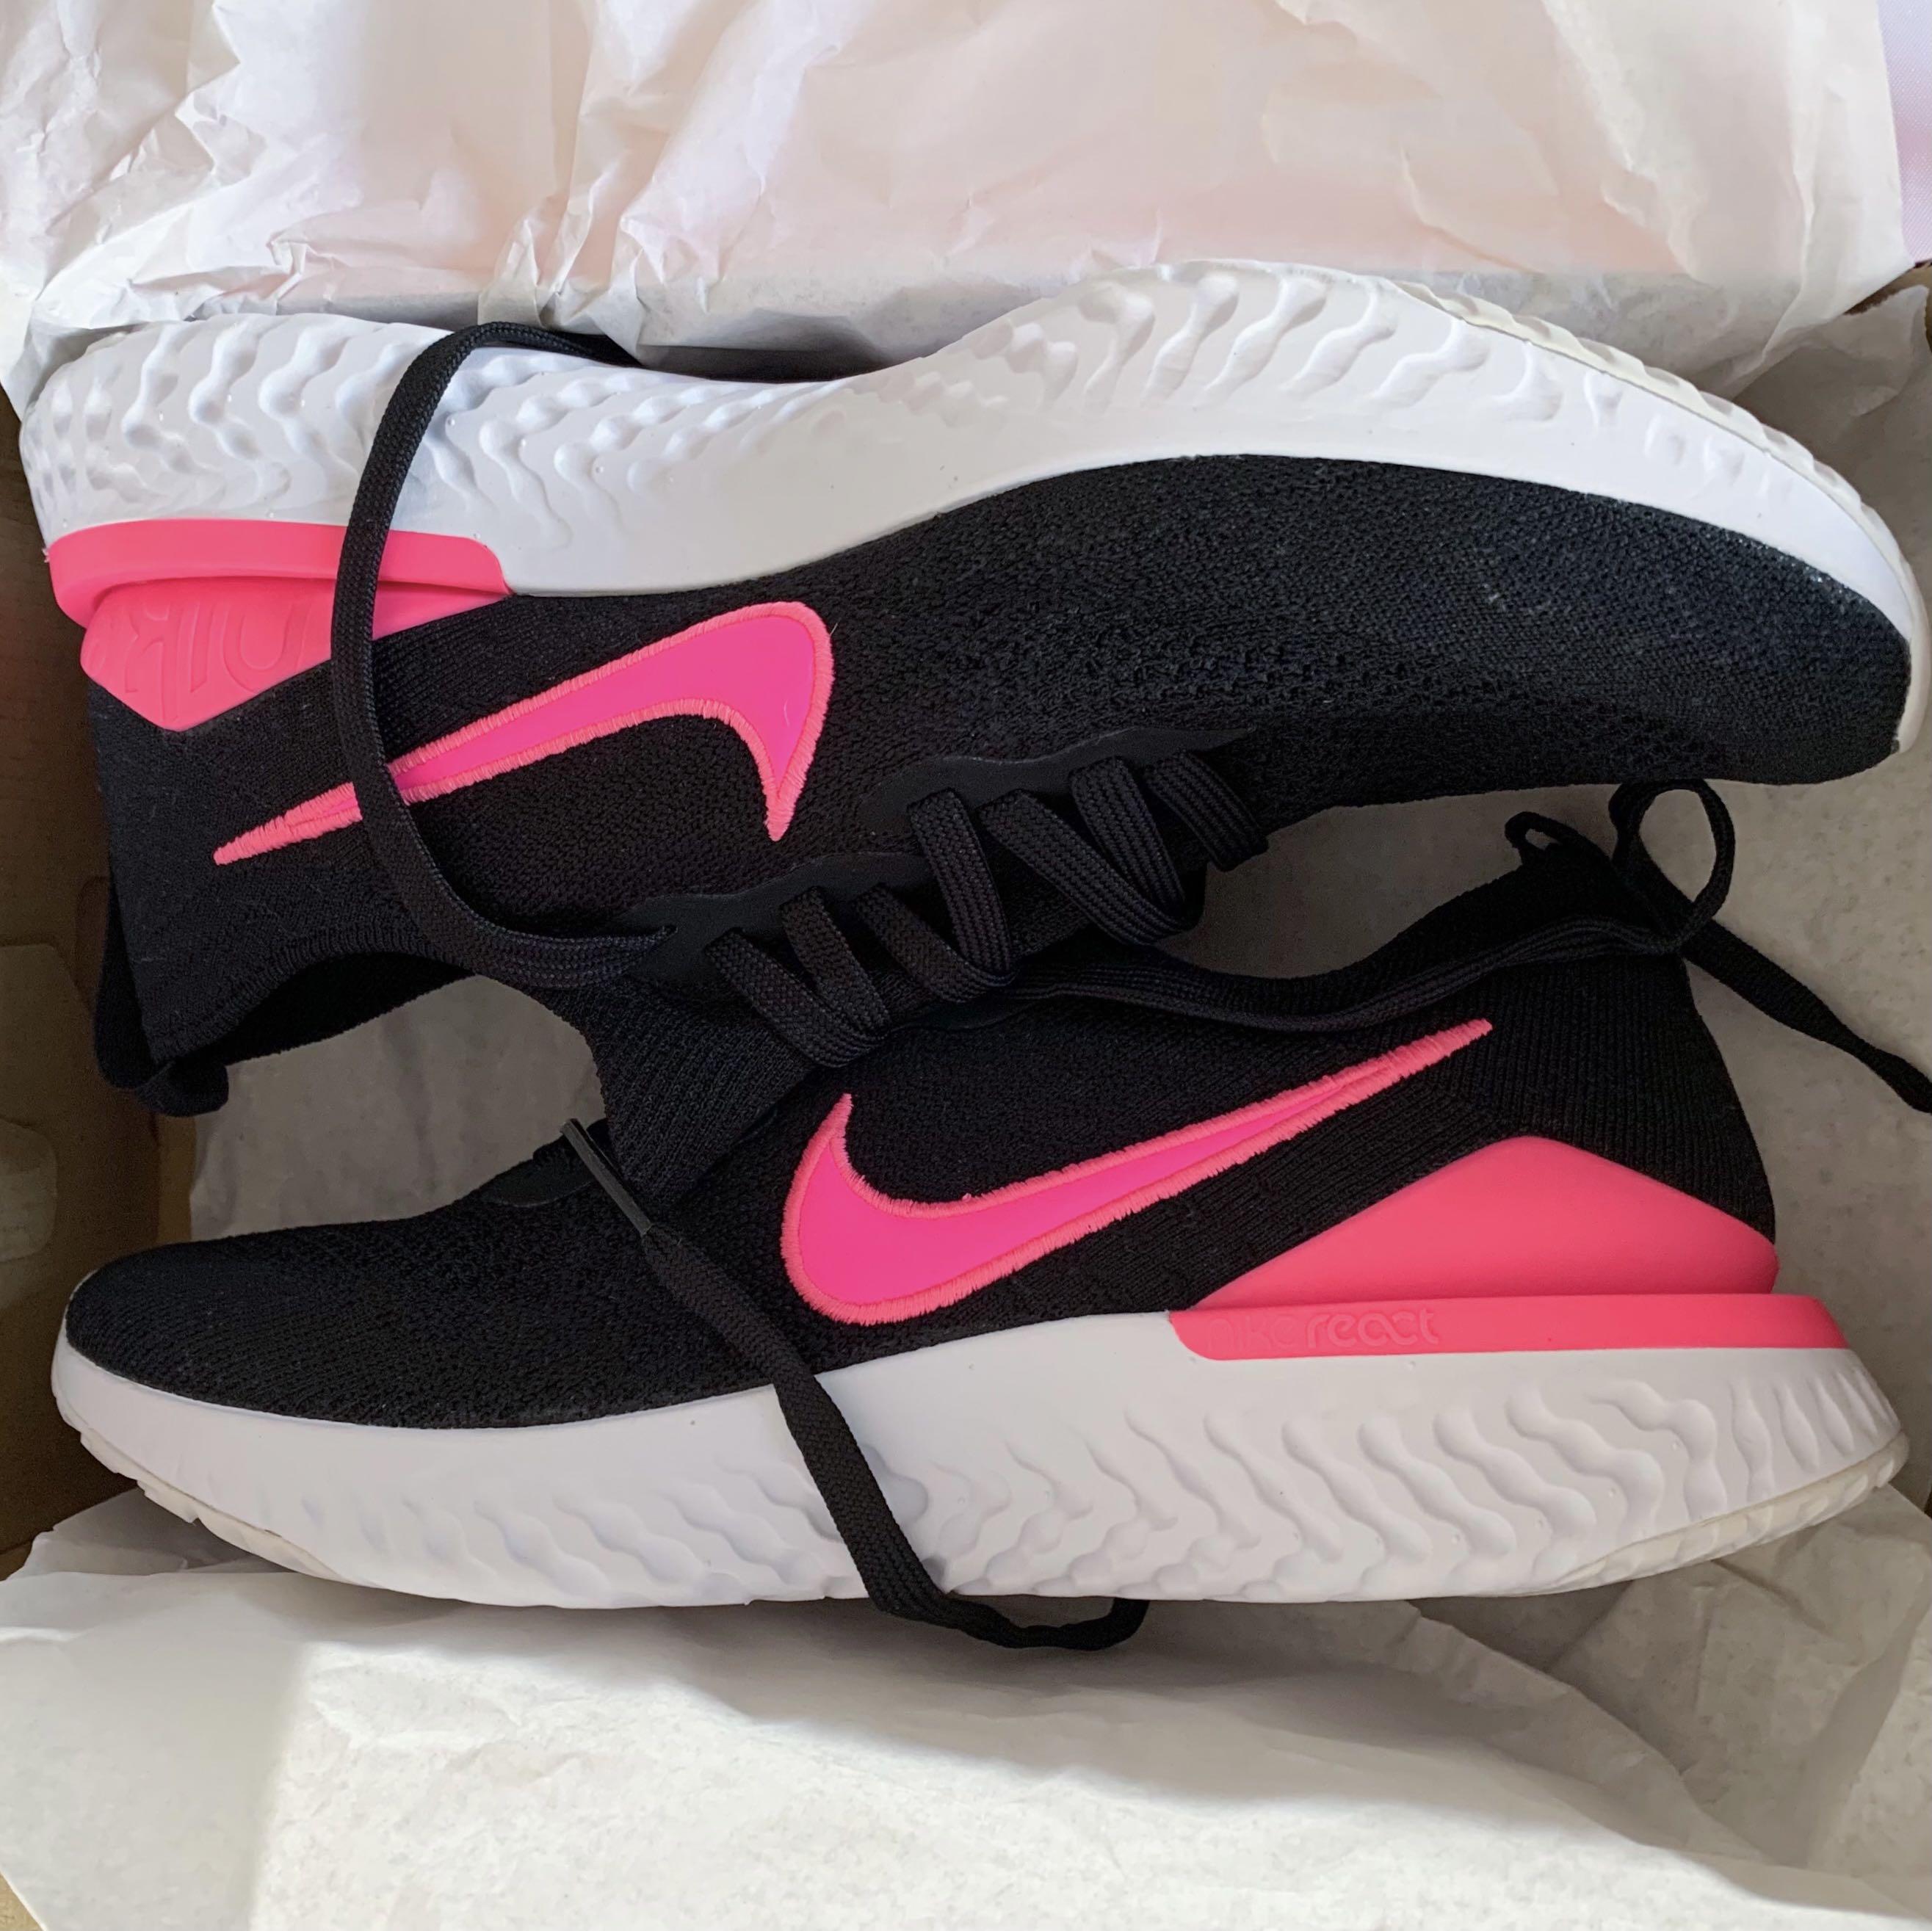 mens black and pink sneakers